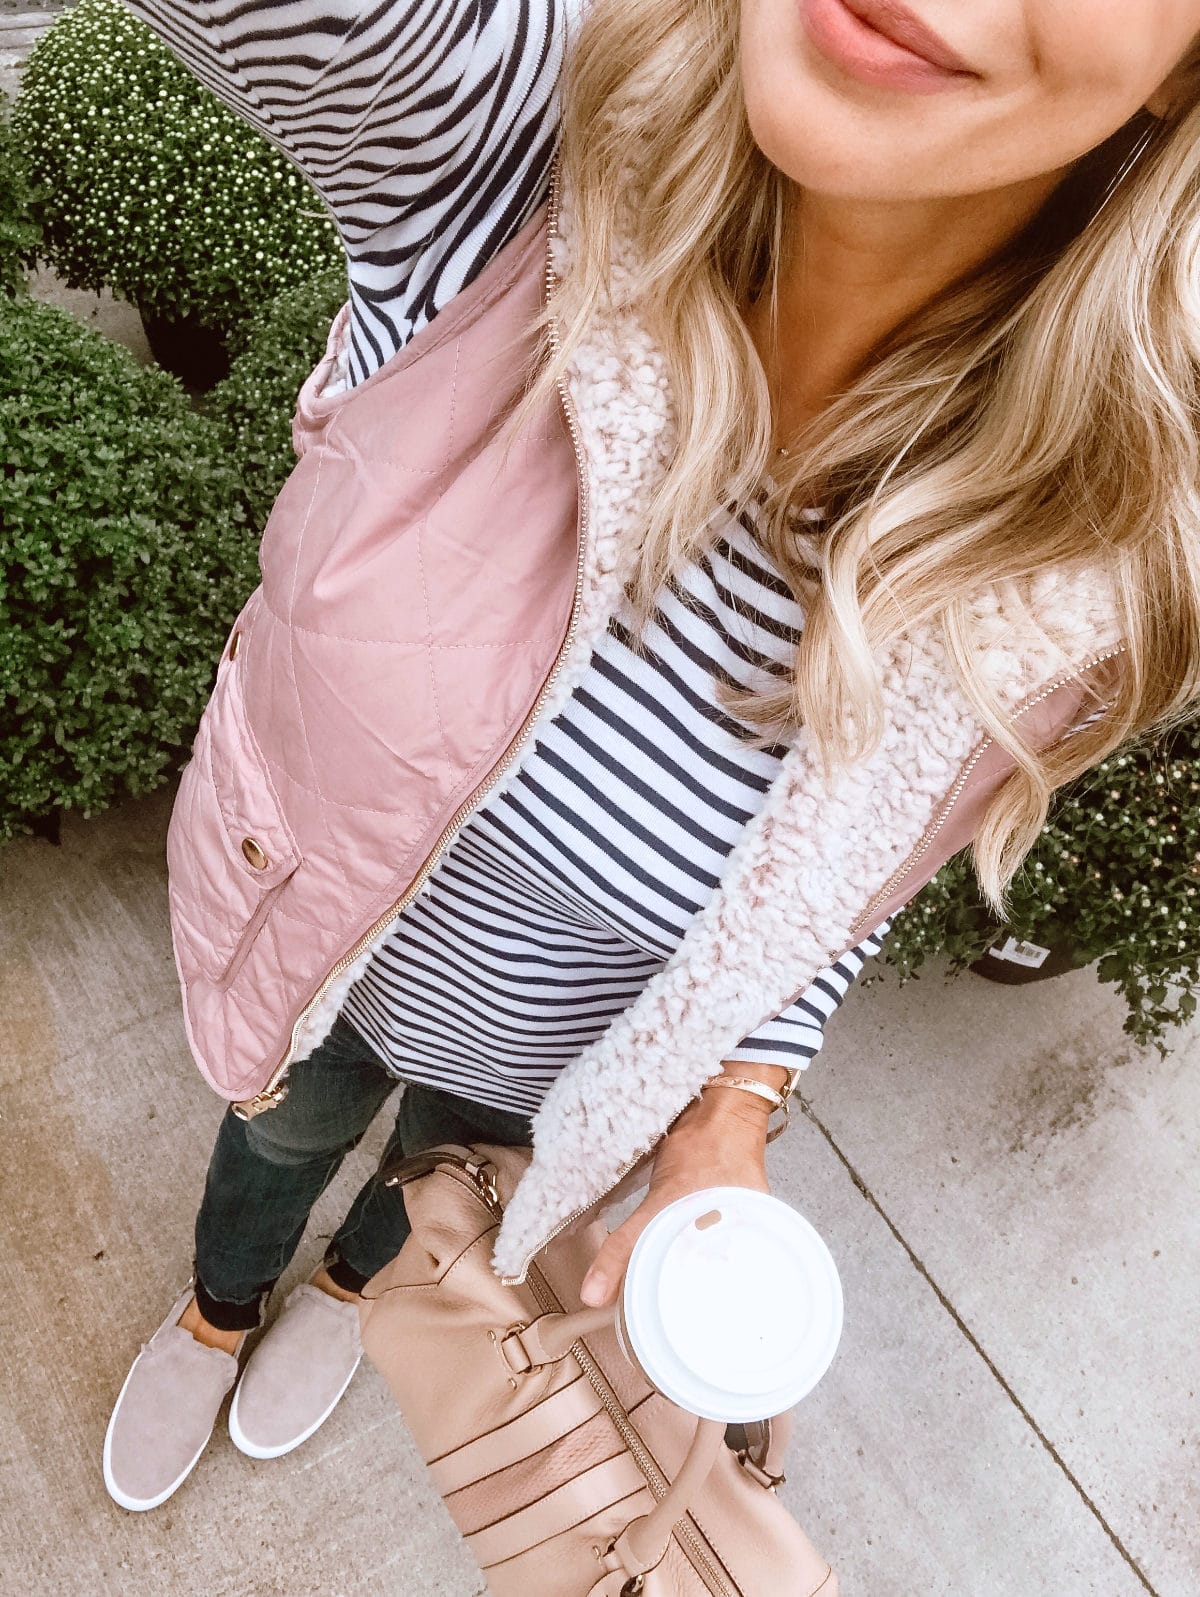 Fall Outfit Inspiration - puffer vest and striped top with jeans and sneakers